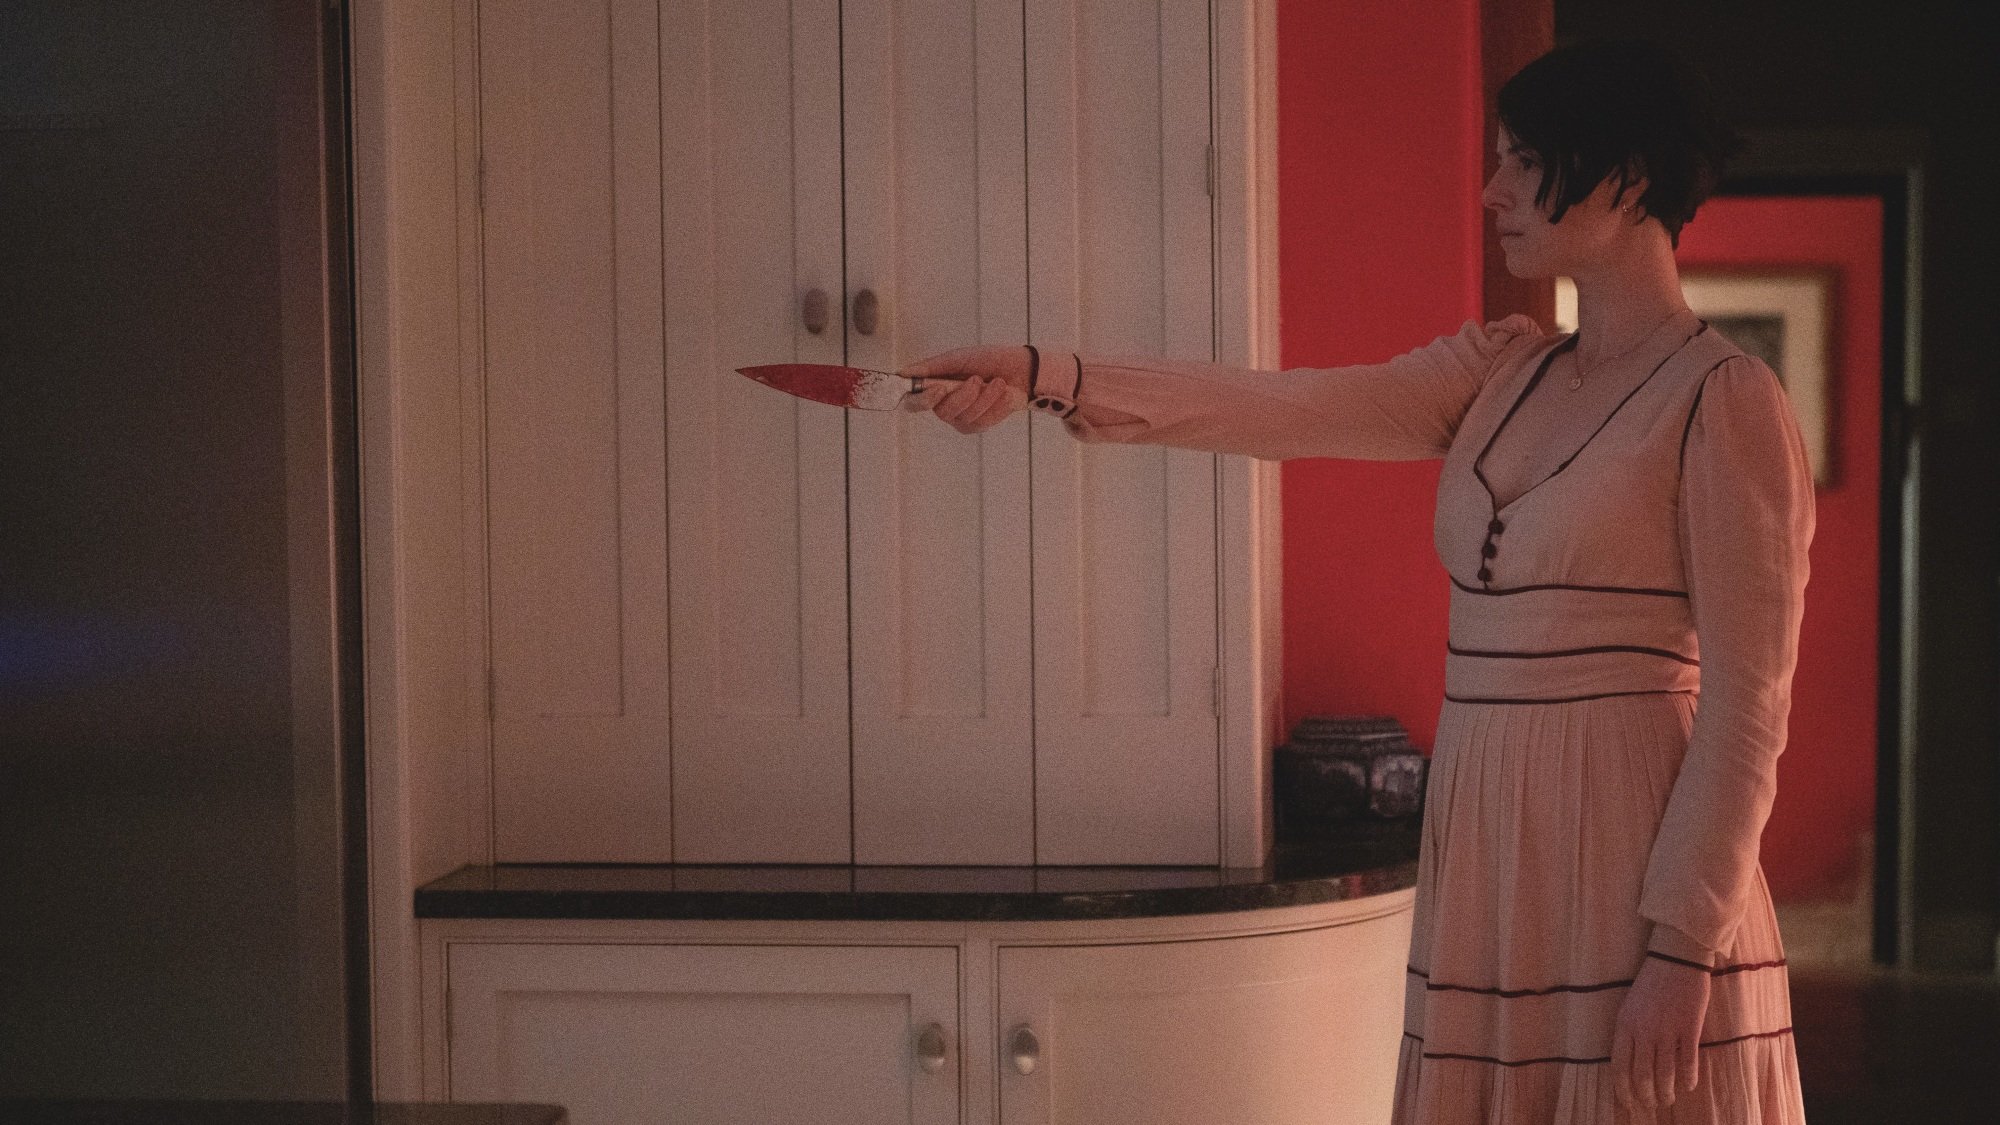 A woman in a pink dress points a bloody knife at an unknown intruder.